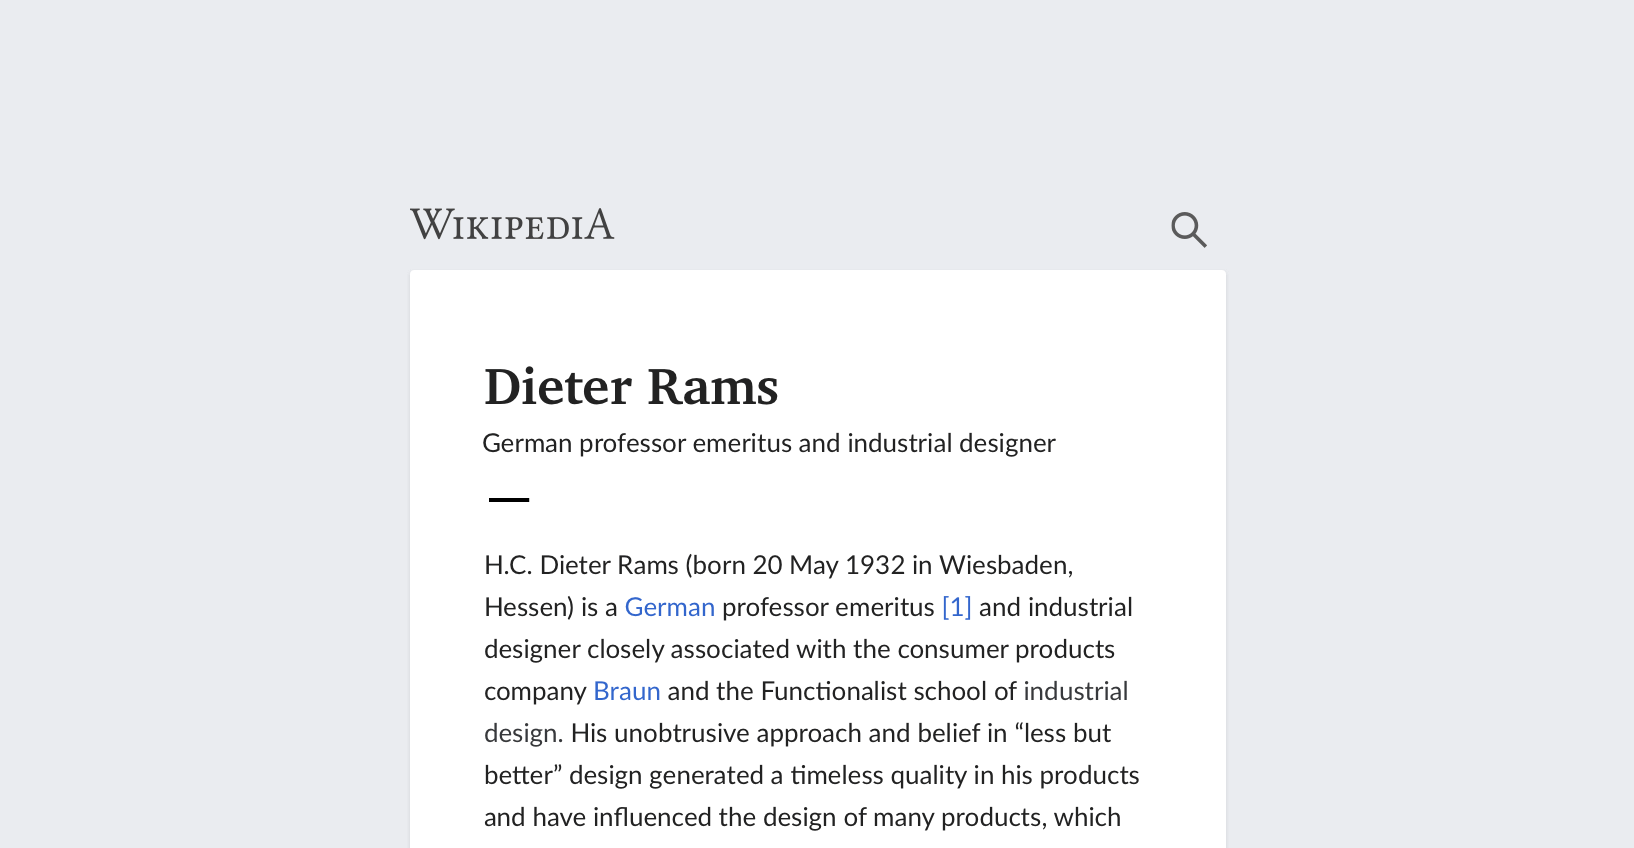 Example screenshot of Wikipedia article about Dieter Rams